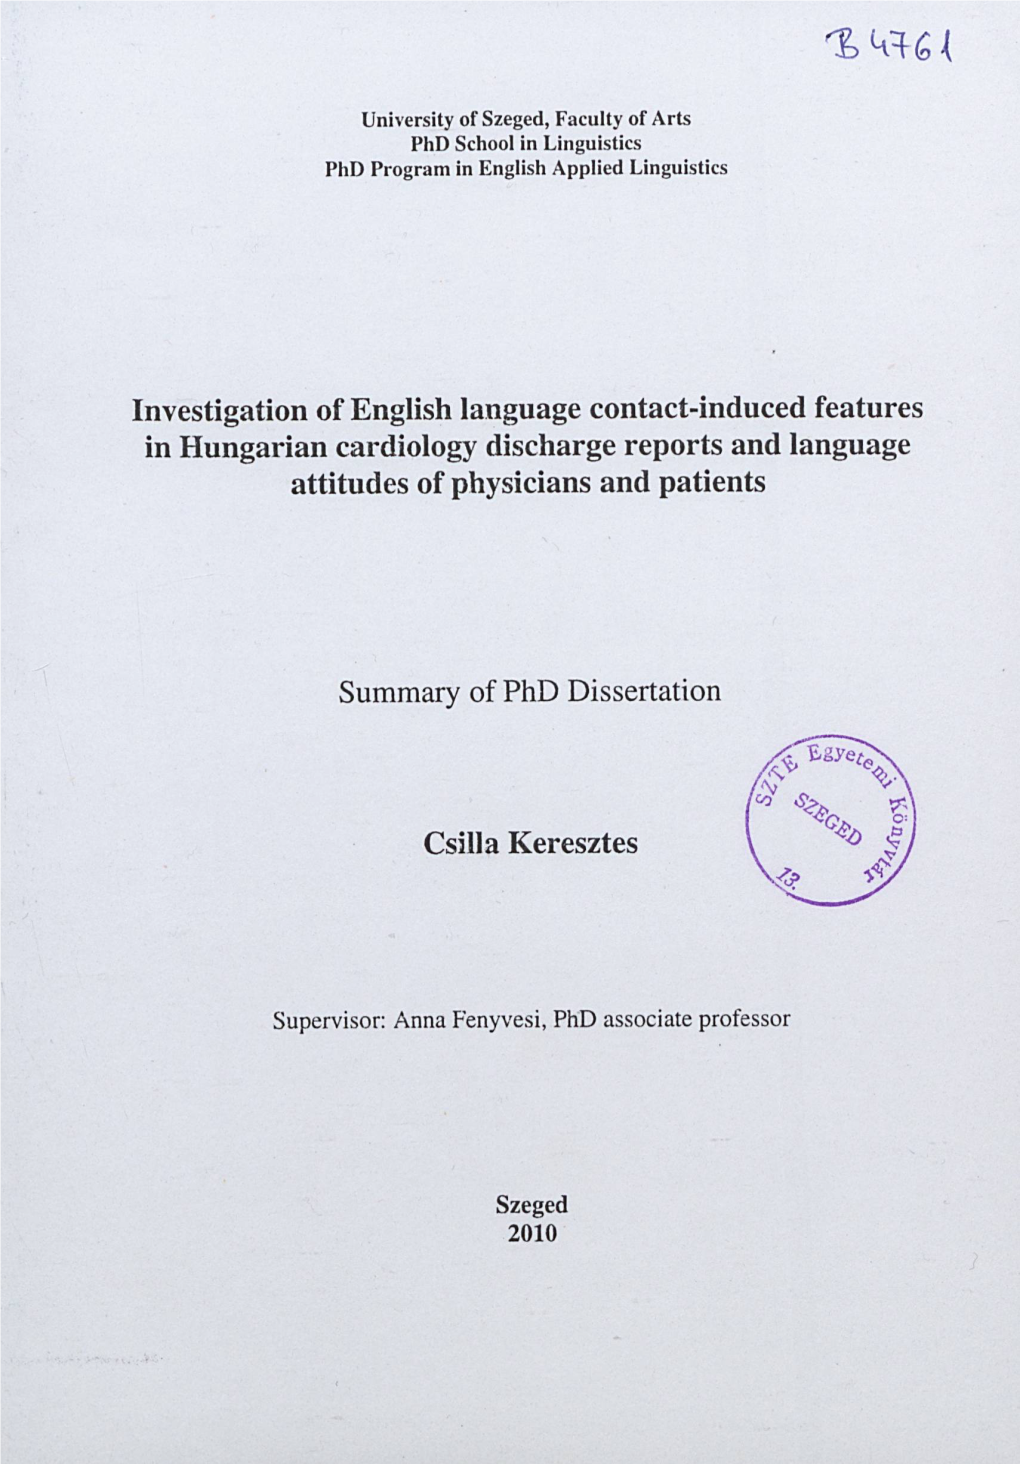 Investigation of English Language Contact-Induced Features in Hungarian Cardiology Discharge Reports and Language Attitudes of Physicians and Patients